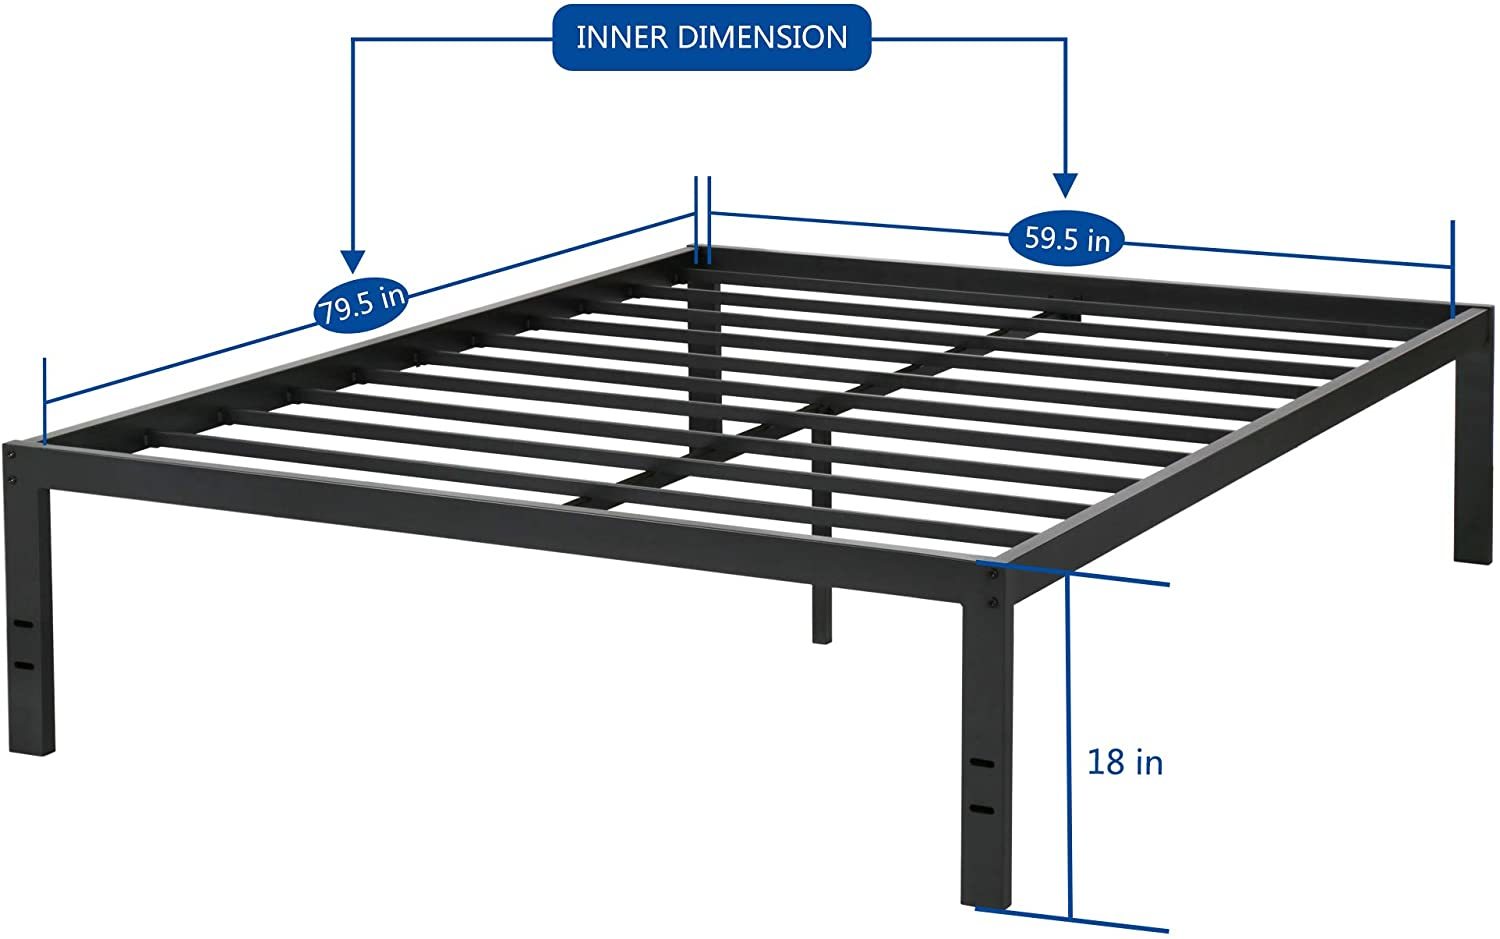 Olee Sleep Bed Frame Reviews - S3500 14 inch & 18 inch - Design Construction